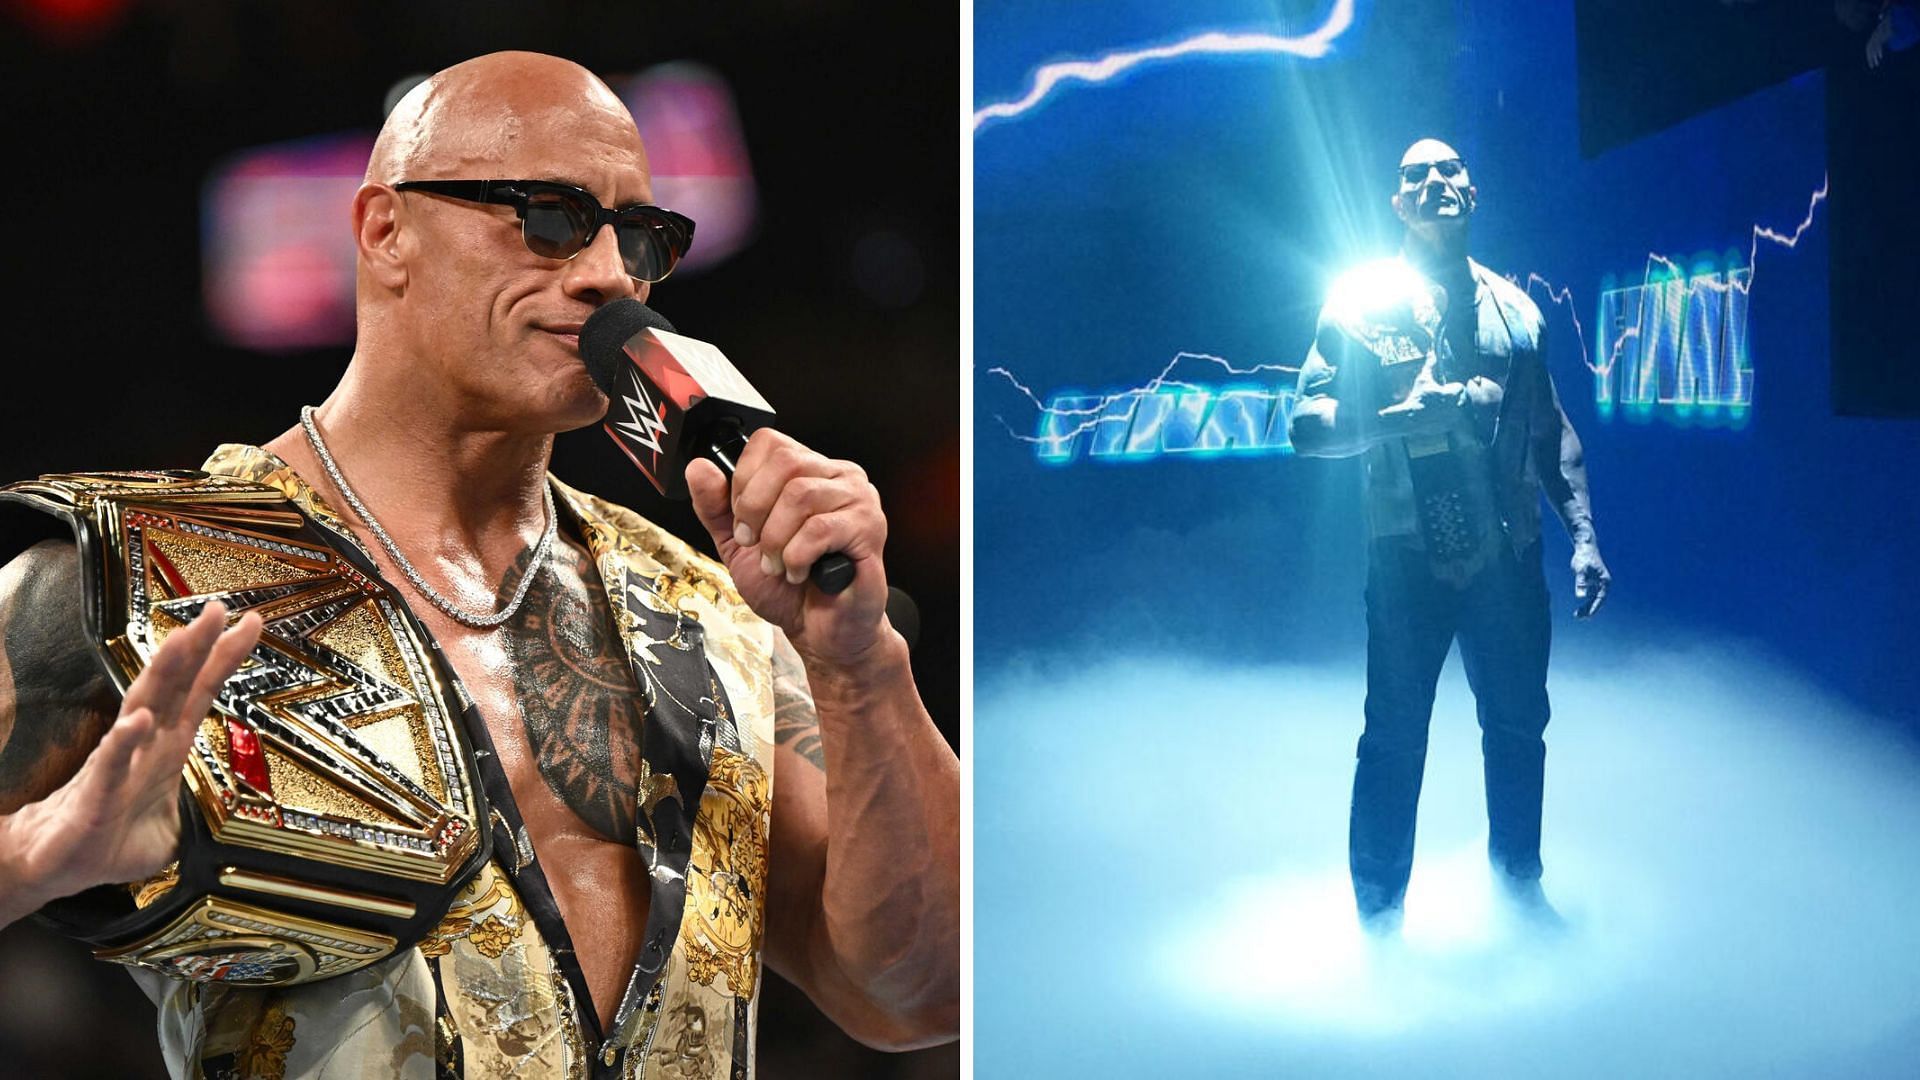 The Rock is a 17-time WWE champion [Image credits: wwe.com]